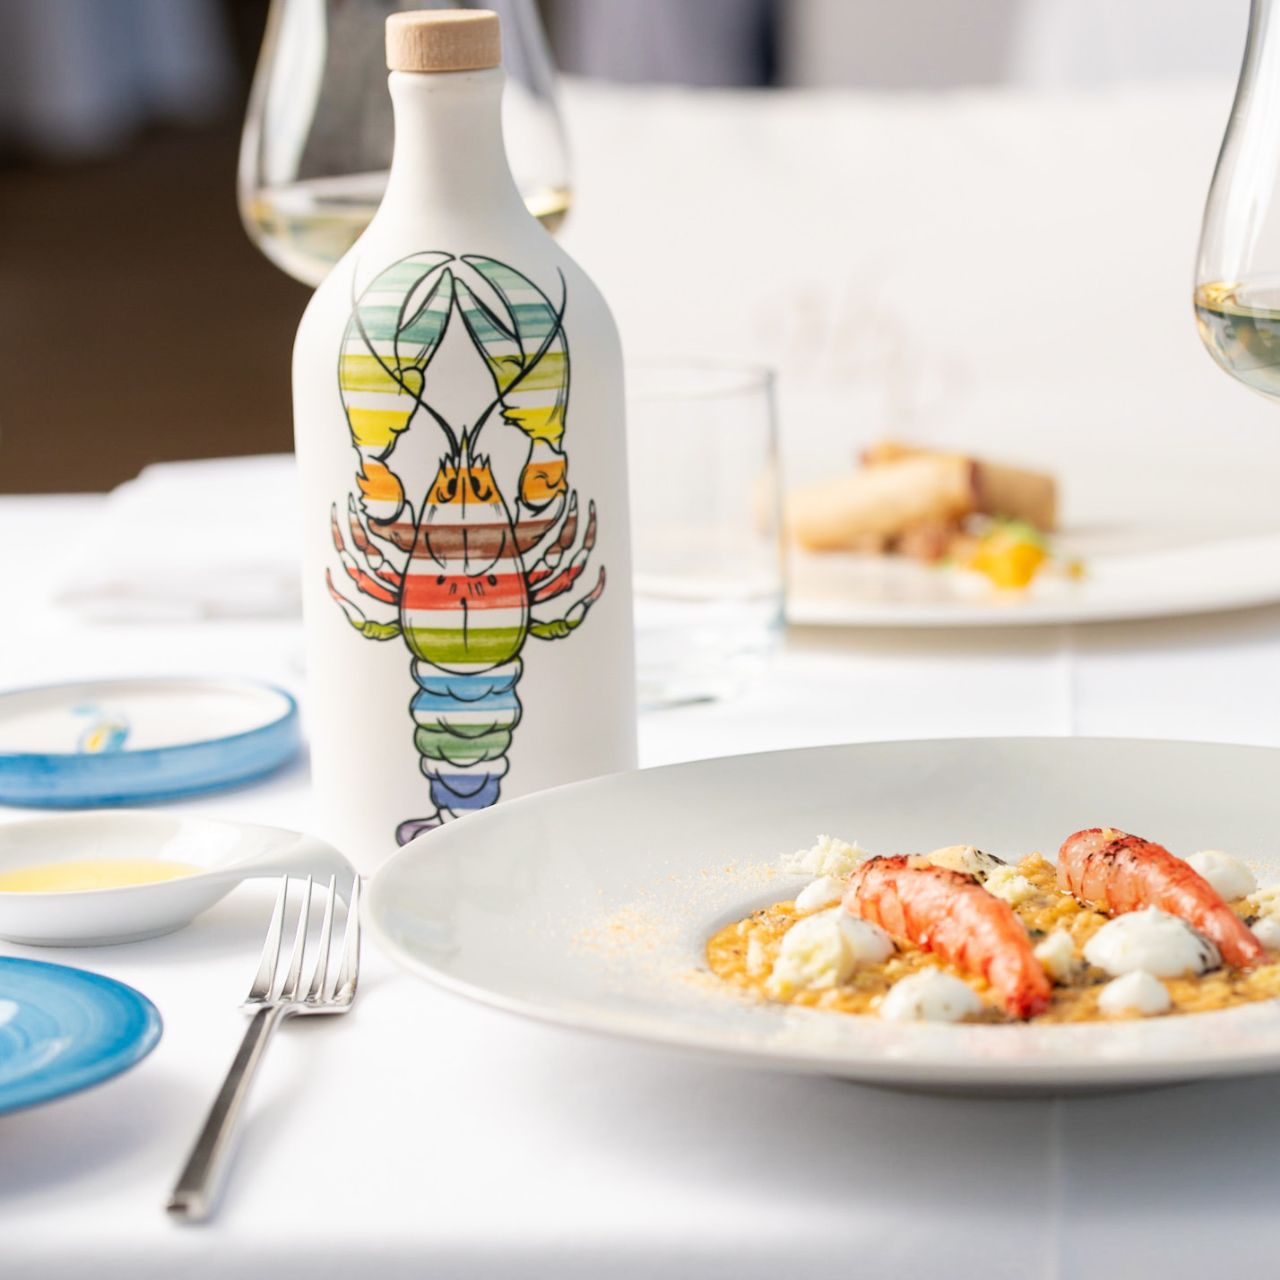 Frantoio Muraglia You are my Lobster! POP Art Collection of Intense Fruity Extra Virgin Olive Oil Feast Italy